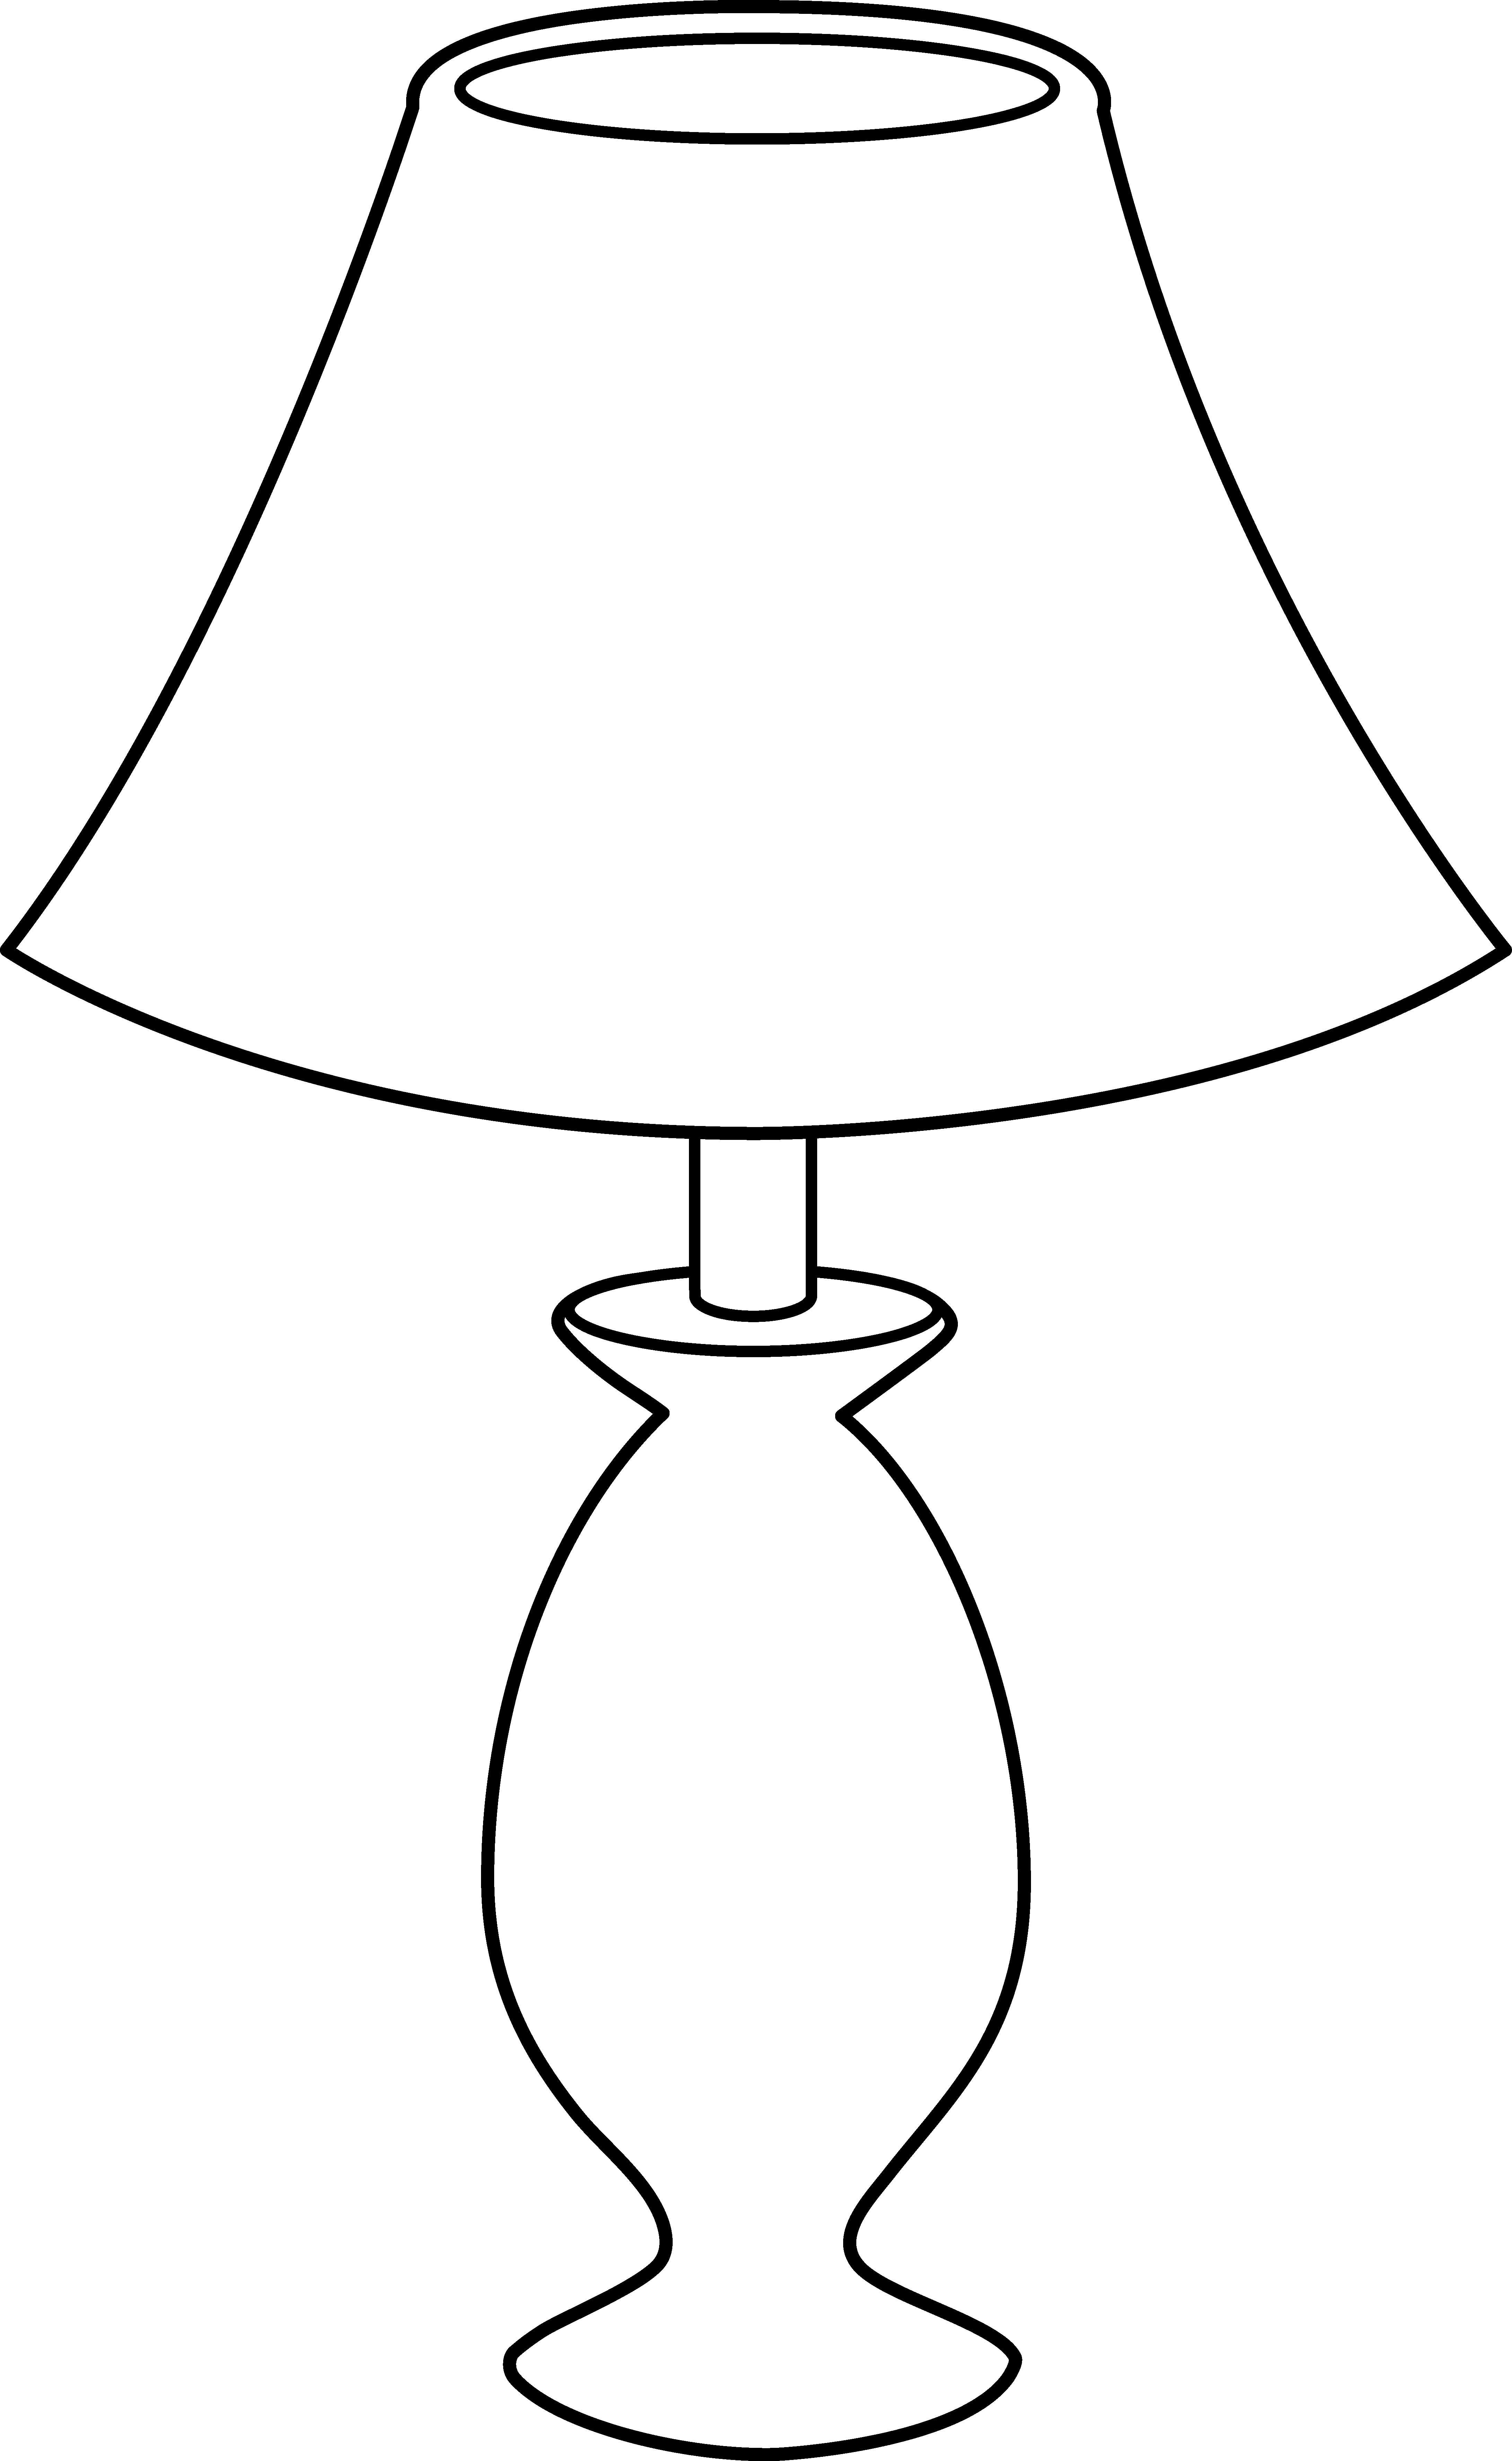 Oil Lamp Clipart Black And White | Clipart Panda - Free Clipart Images